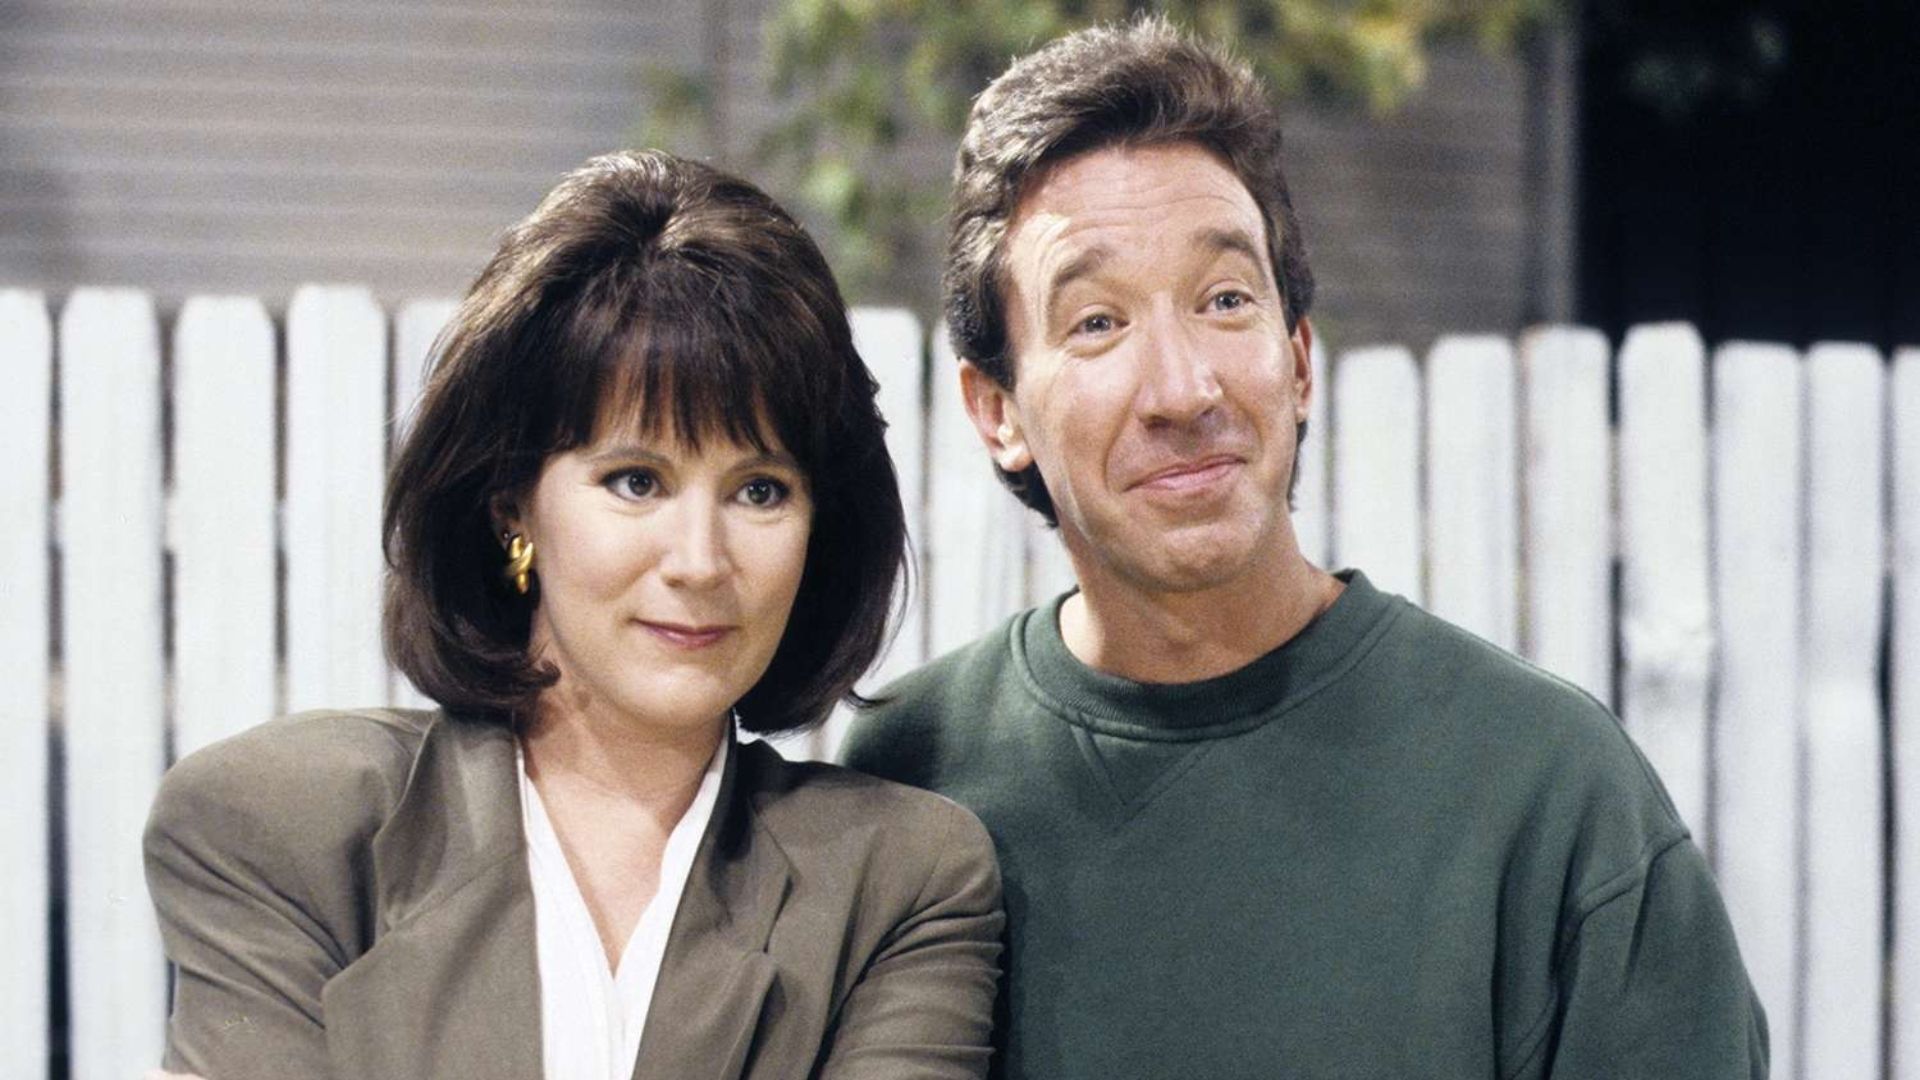 Home Improvement Star Used Gender Pay Gap with Tim Allen to Force the Show to End